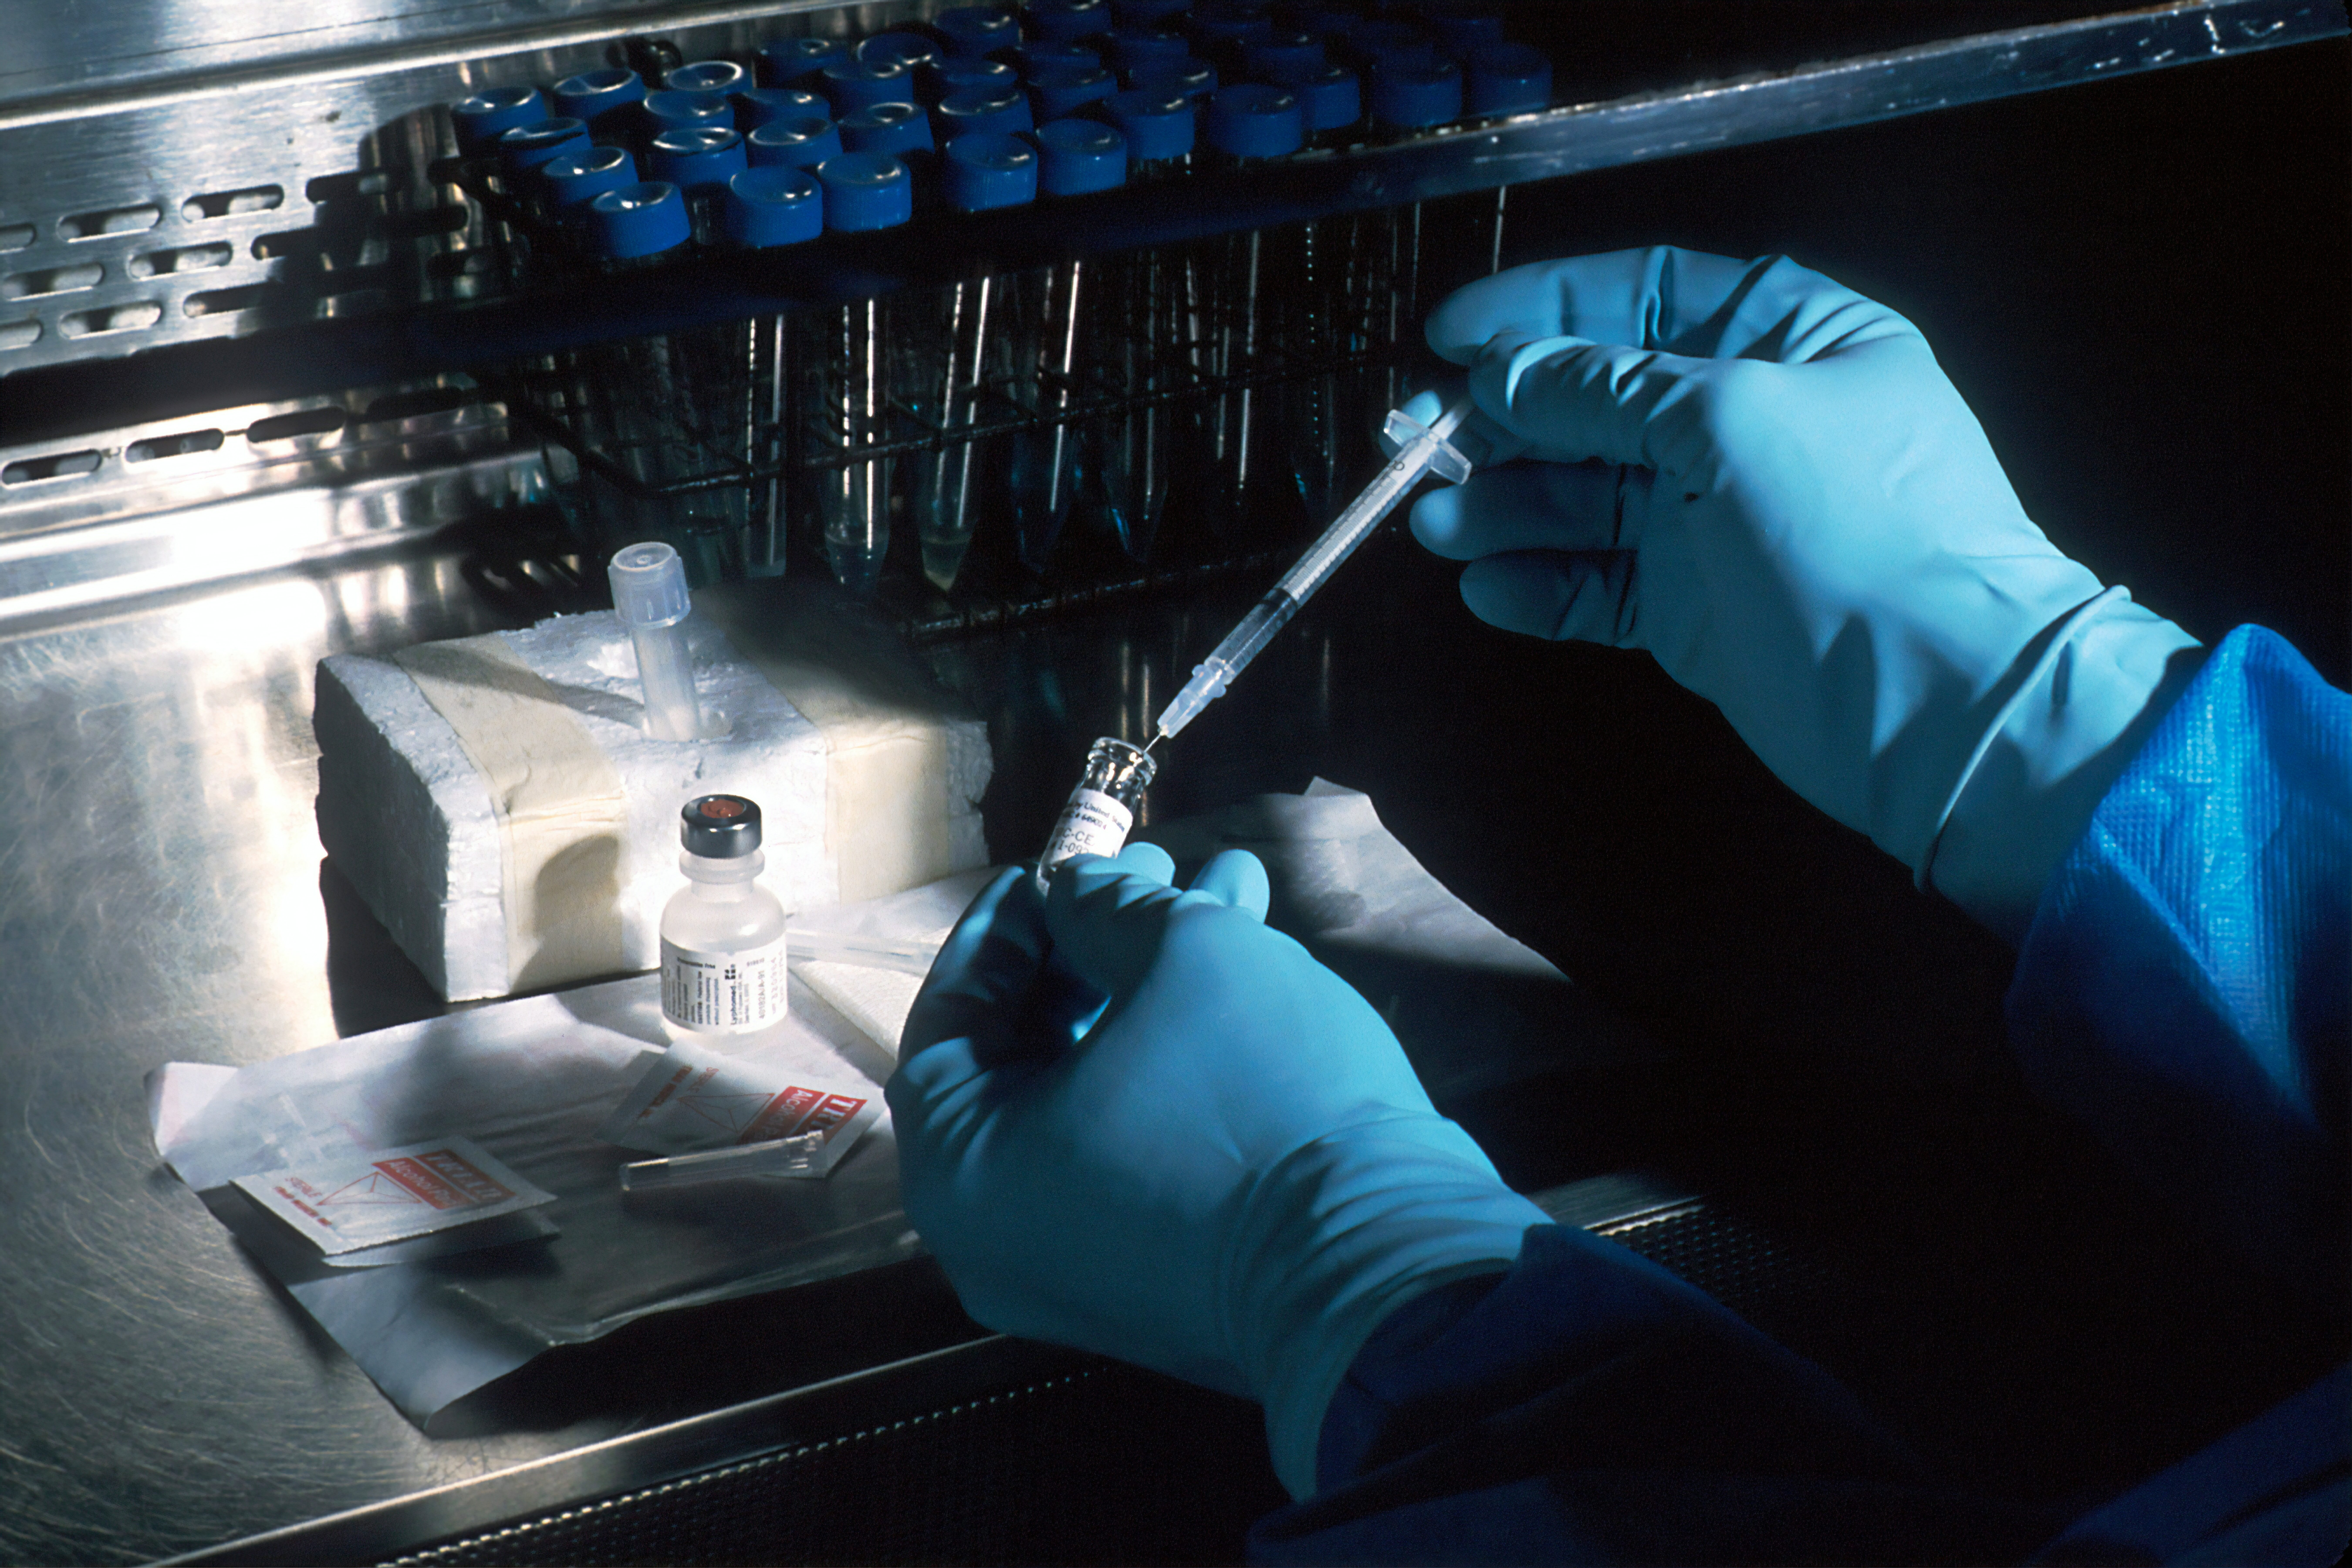 Vaccine. Hands of a scientist, under a sterile hood, preparing the carcinoembryonic antigen (CEA) vaccinia used to try to prevent cancer. The scientist is diluting the concentrated vaccinnia virus into a dose level appropriate for administration to a patient. This vaccinnia marks any cancer cells expressing the CEA.